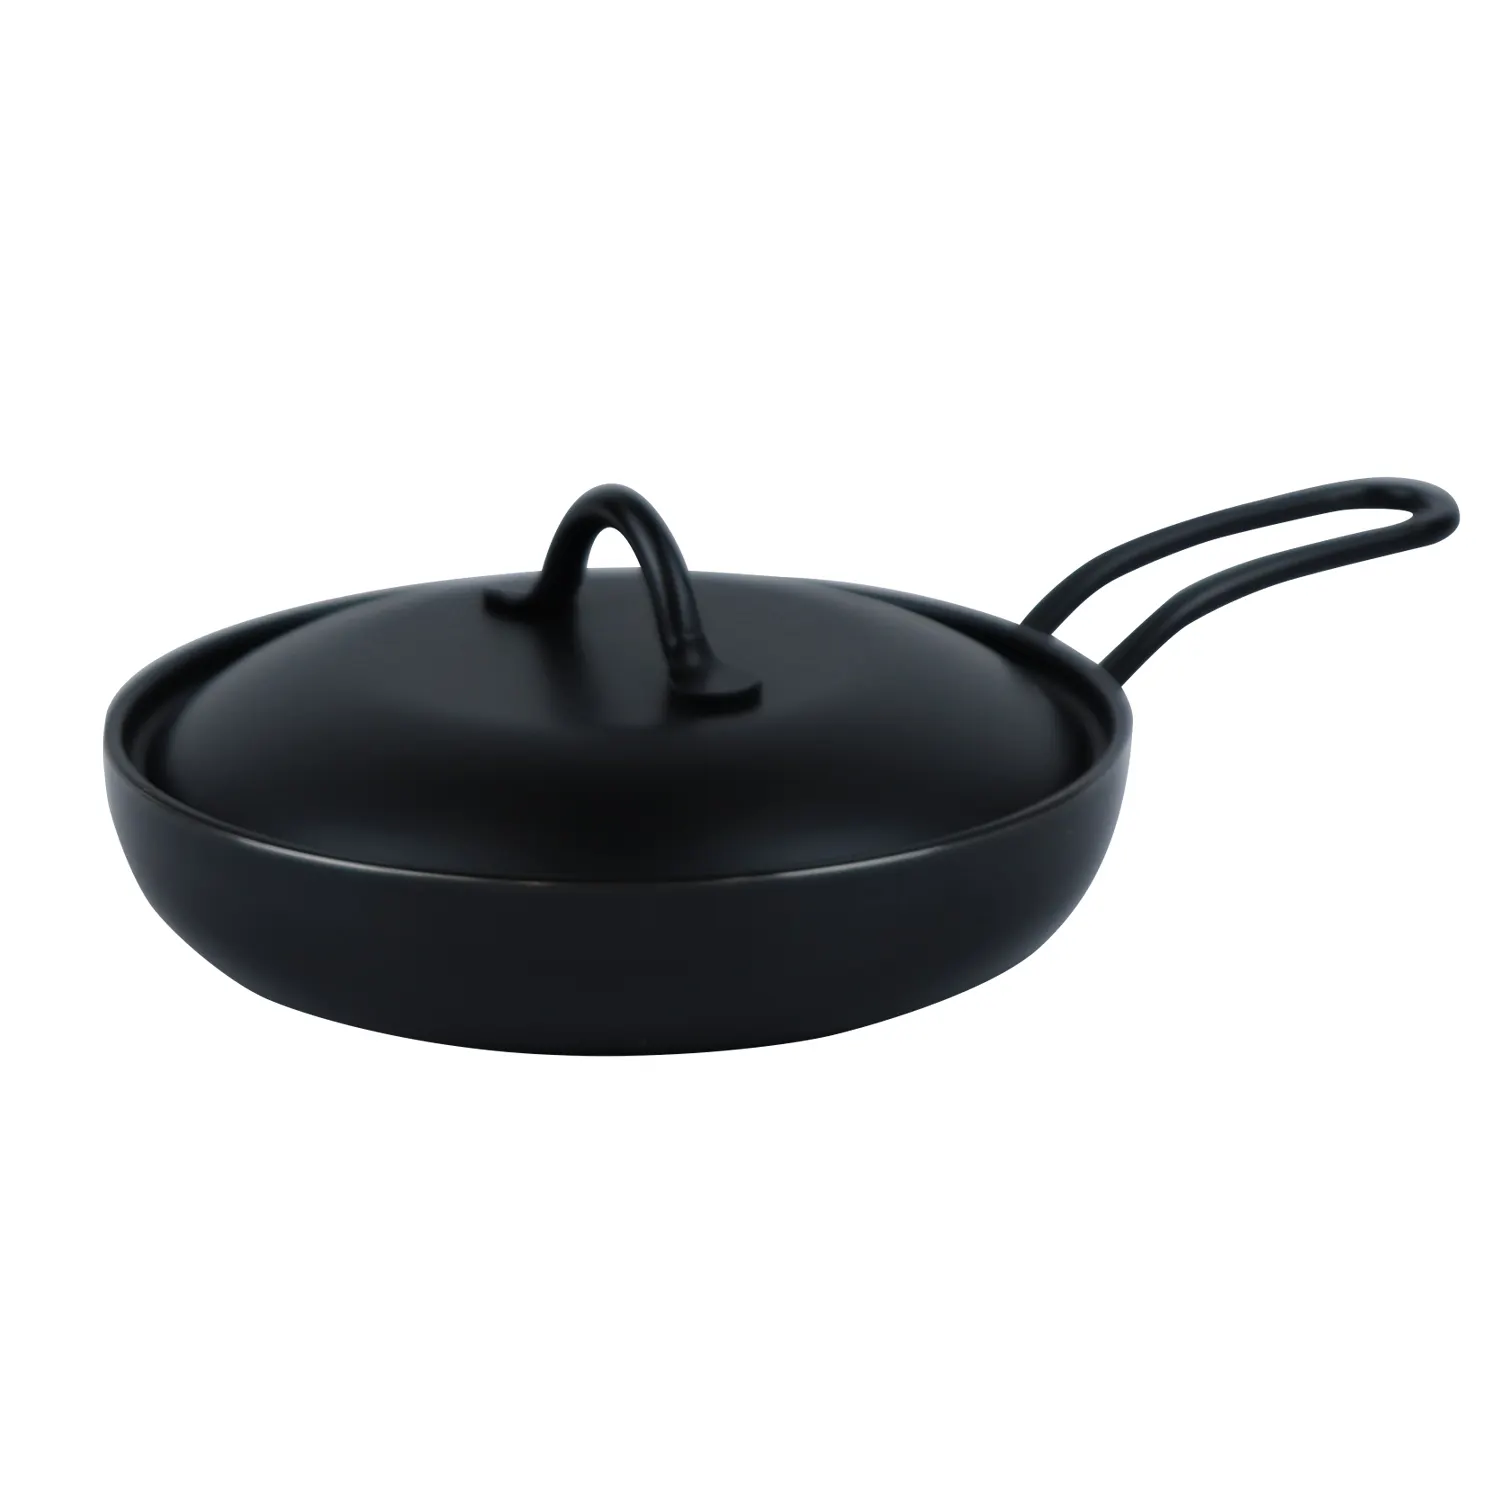 Japan wholesale cast iron wok pan wooden handle Can directly put in the ovens/stoves and cook